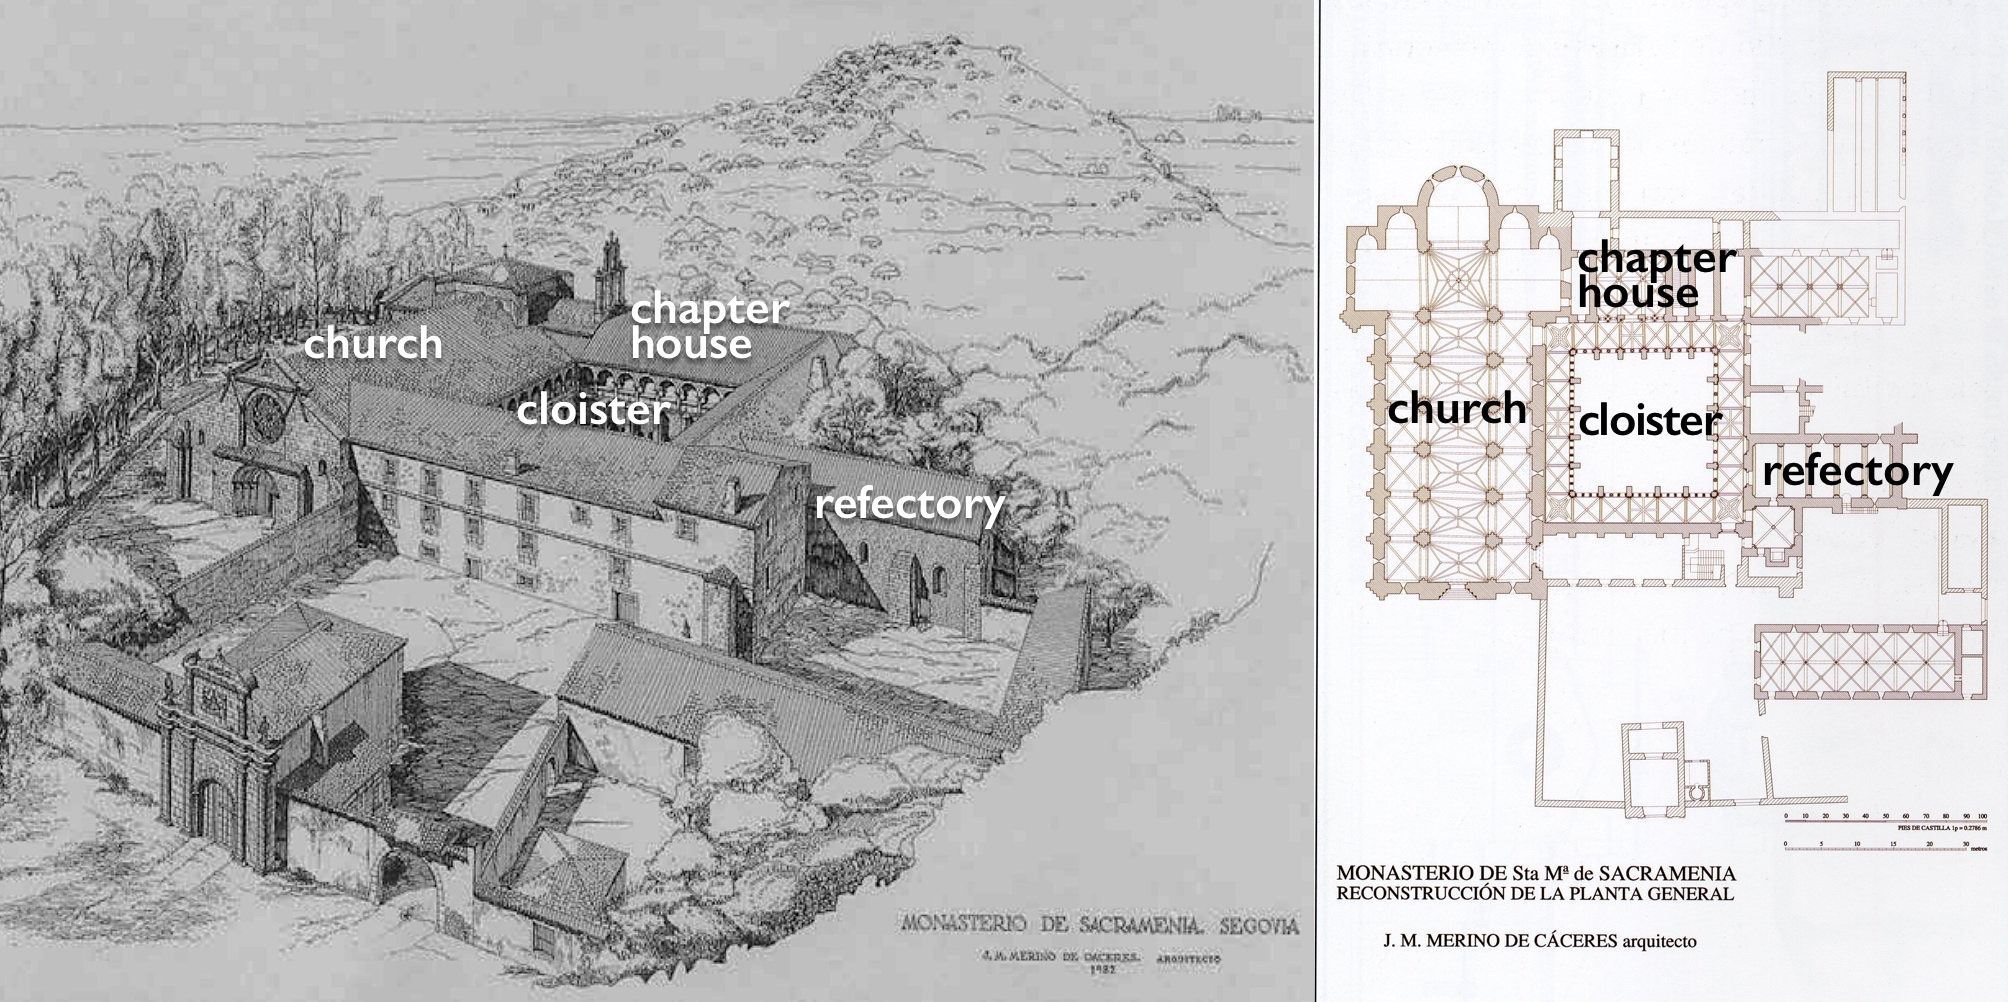 Perspective and plan of the monastery before the plunder (according to Joseé Miguel Merino de Cáceres, architect, from 1982)